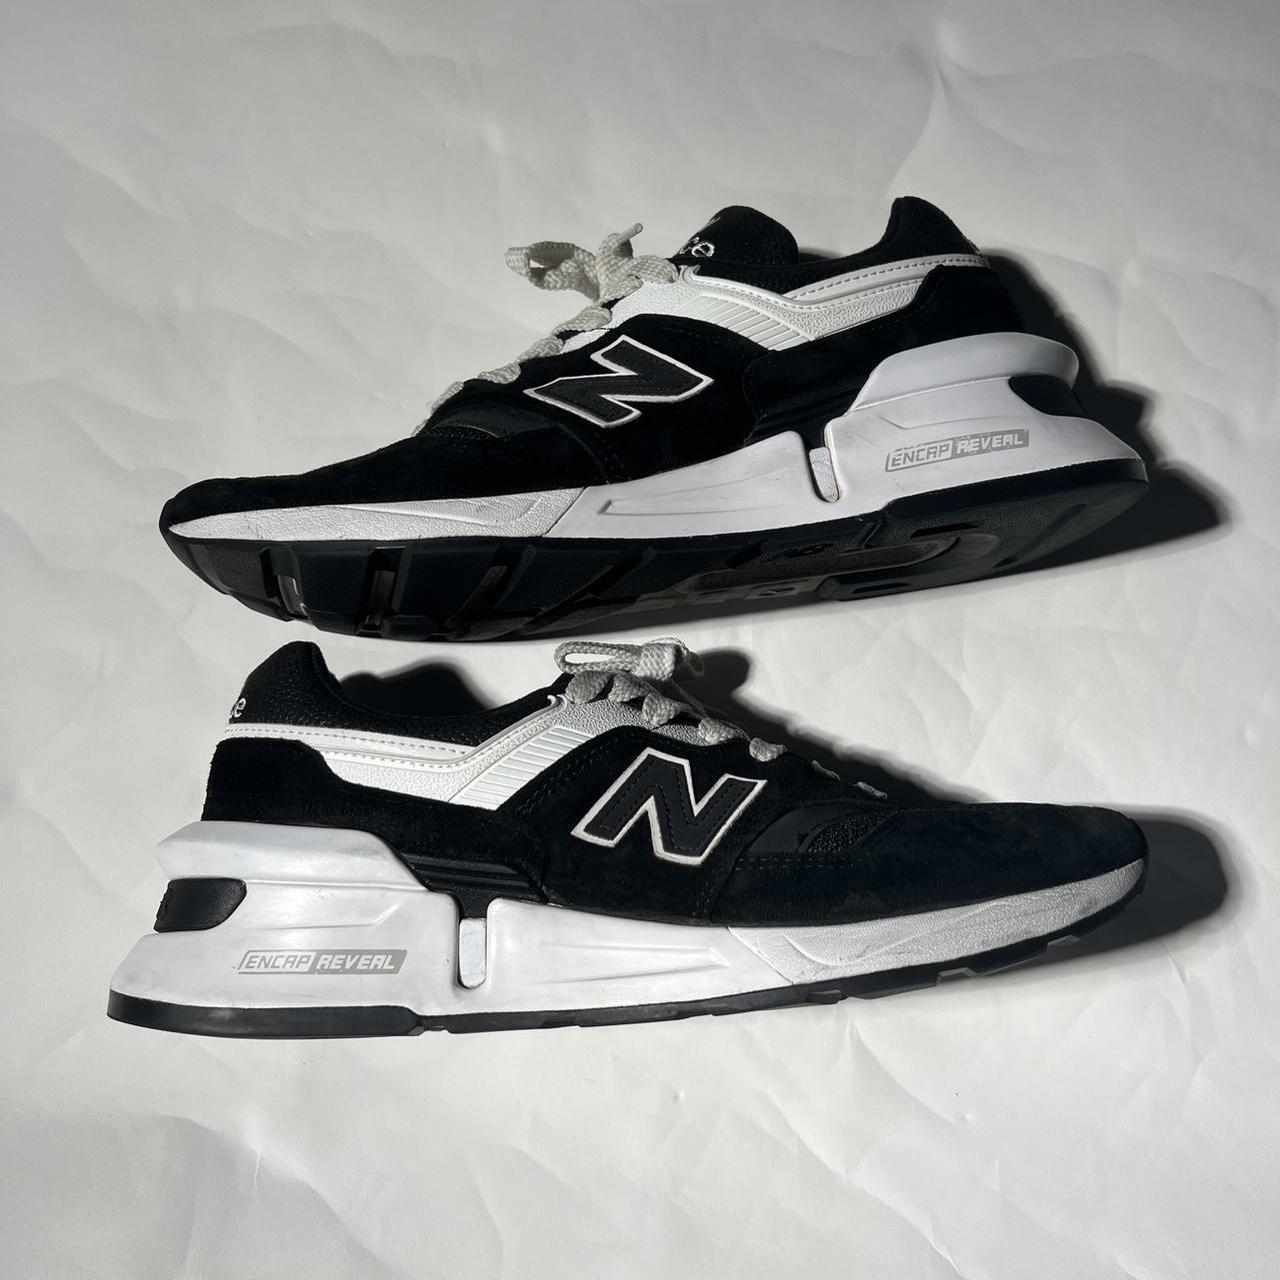 New Balance Men's Black and White Trainers - 3